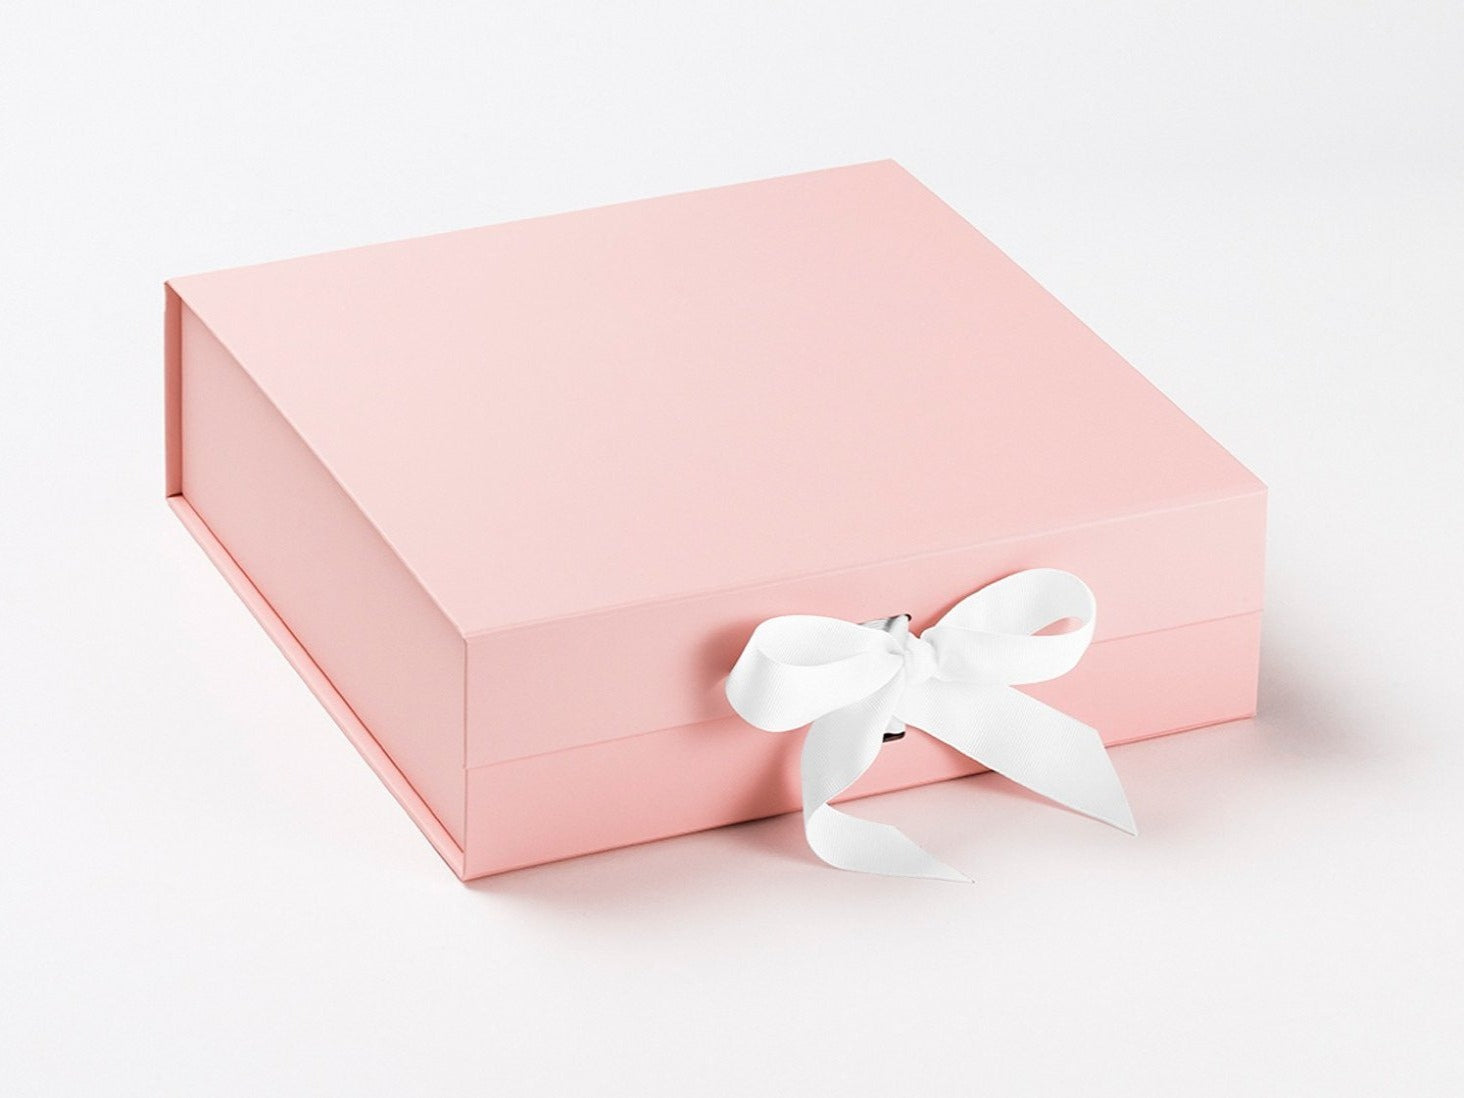 Download Wholesale Luxury Pale Pink Large Folding Gift Boxes ...